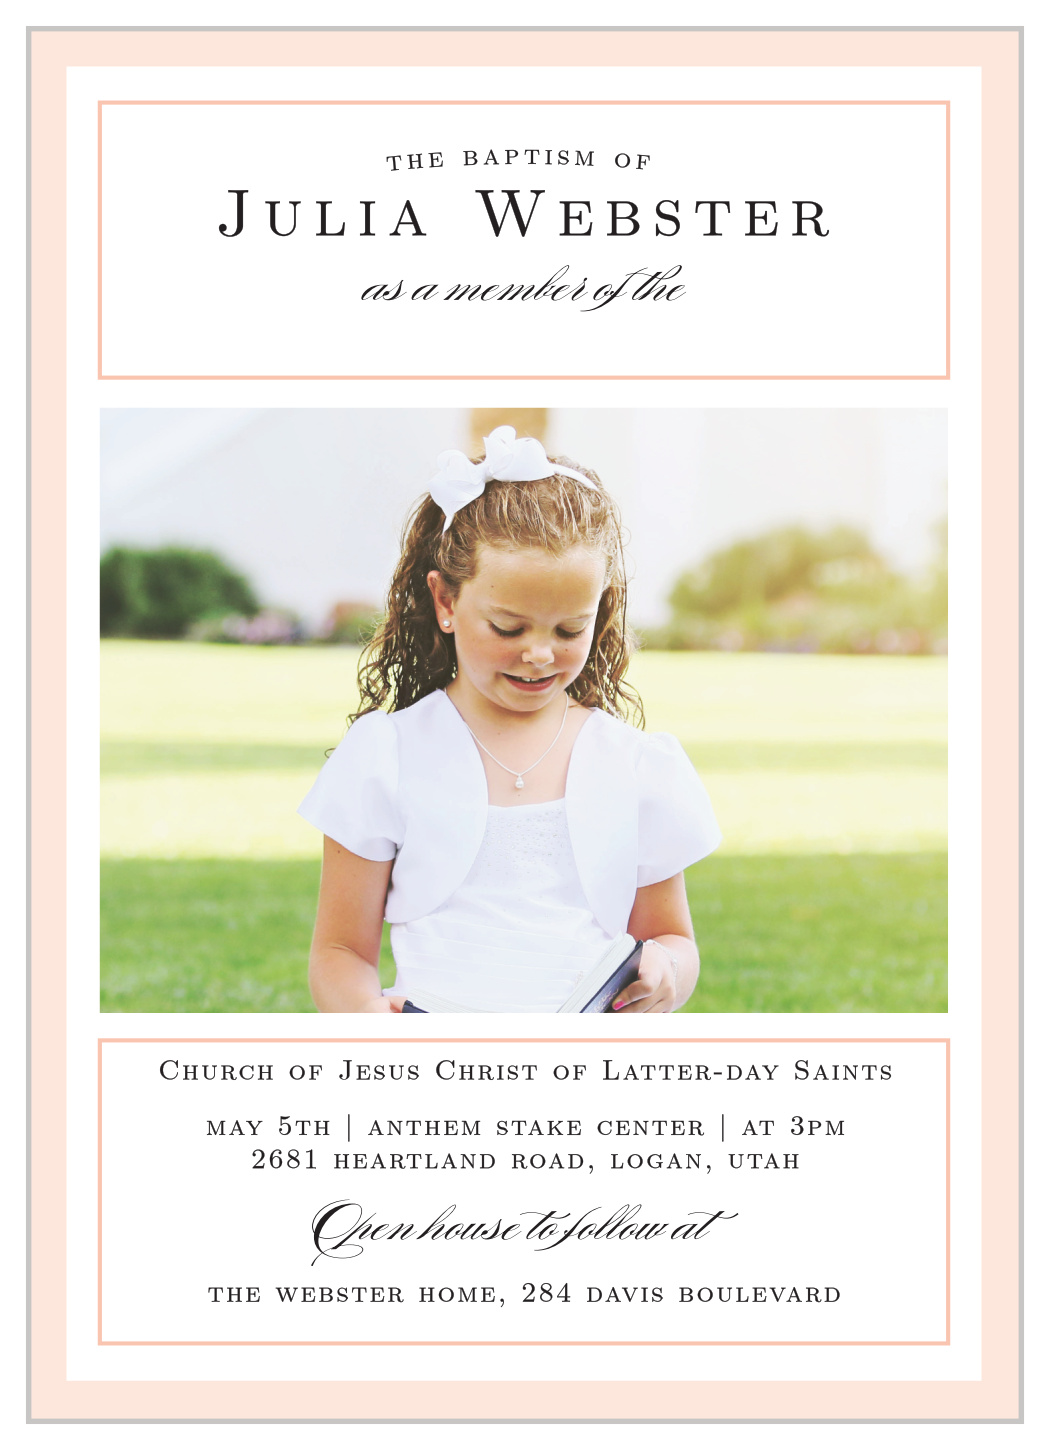 Moving On Girl LDS Baptism Invitations